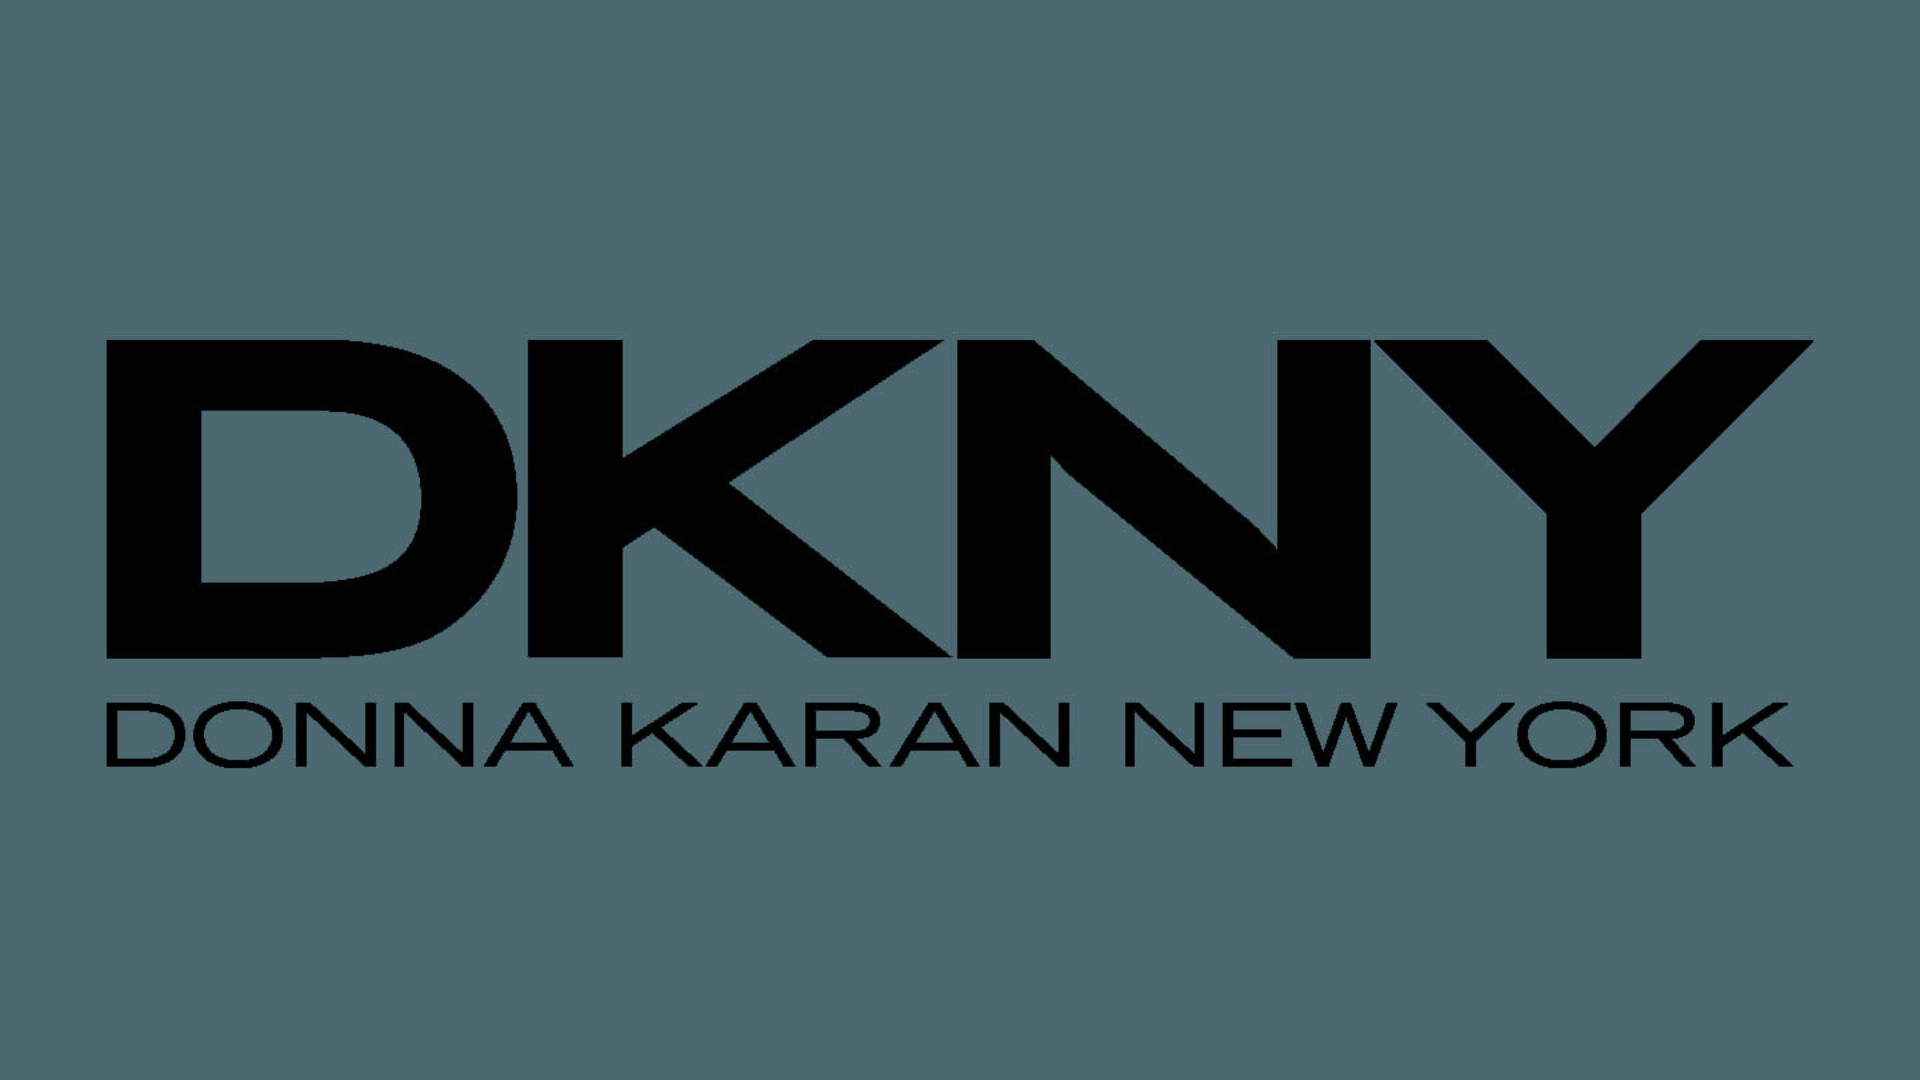 100+] Dkny Wallpapers